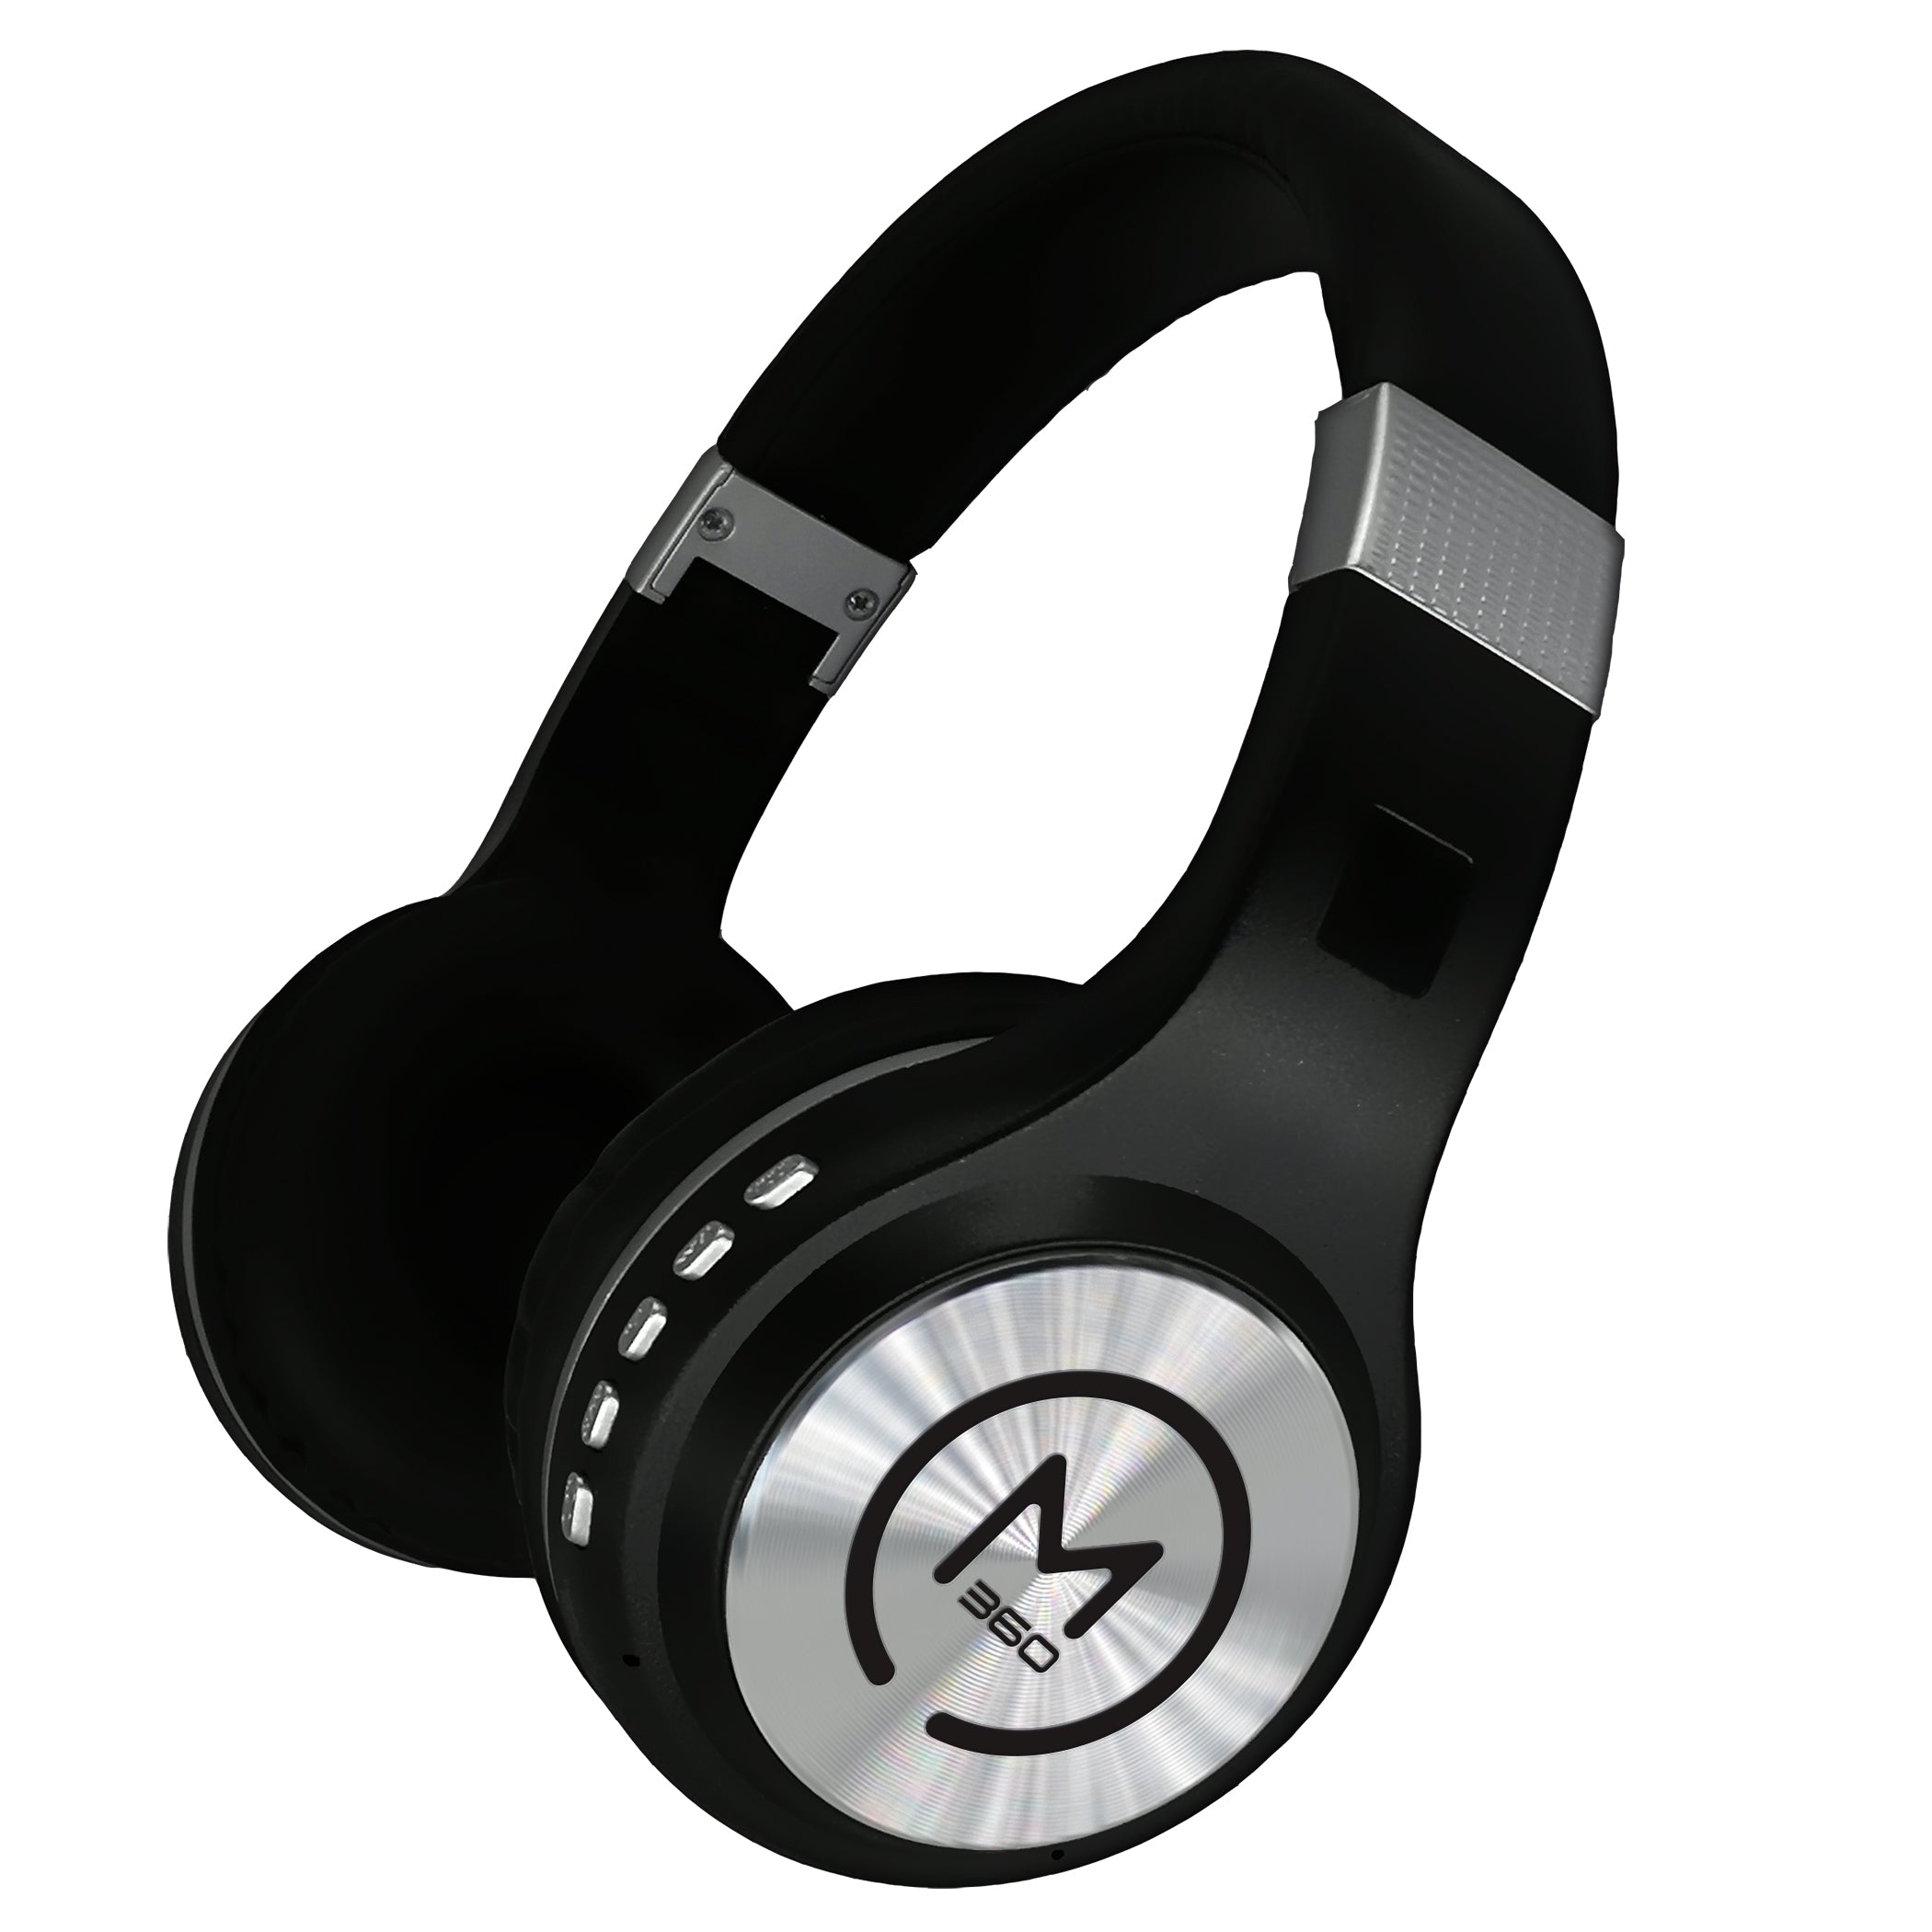 Morpheus 360 Serenity Wireless Over Ear Headphones, Bluetooth Headset,  Built-in Microphone, 12H Playtime, Comfortable HP5500B